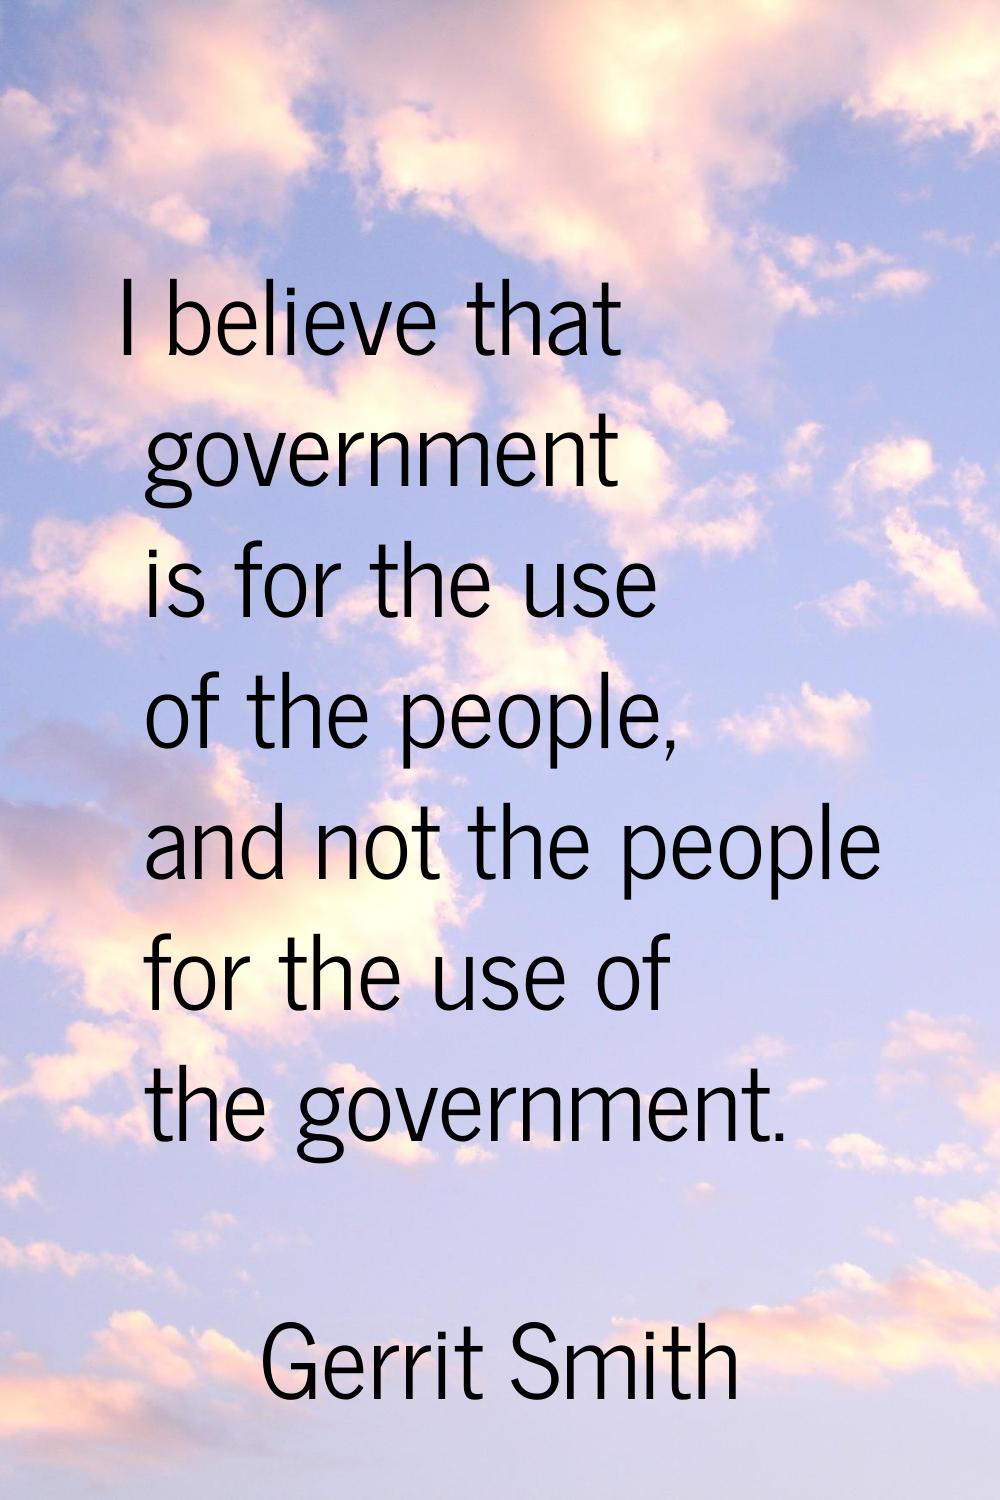 I believe that government is for the use of the people, and not the people for the use of the gover